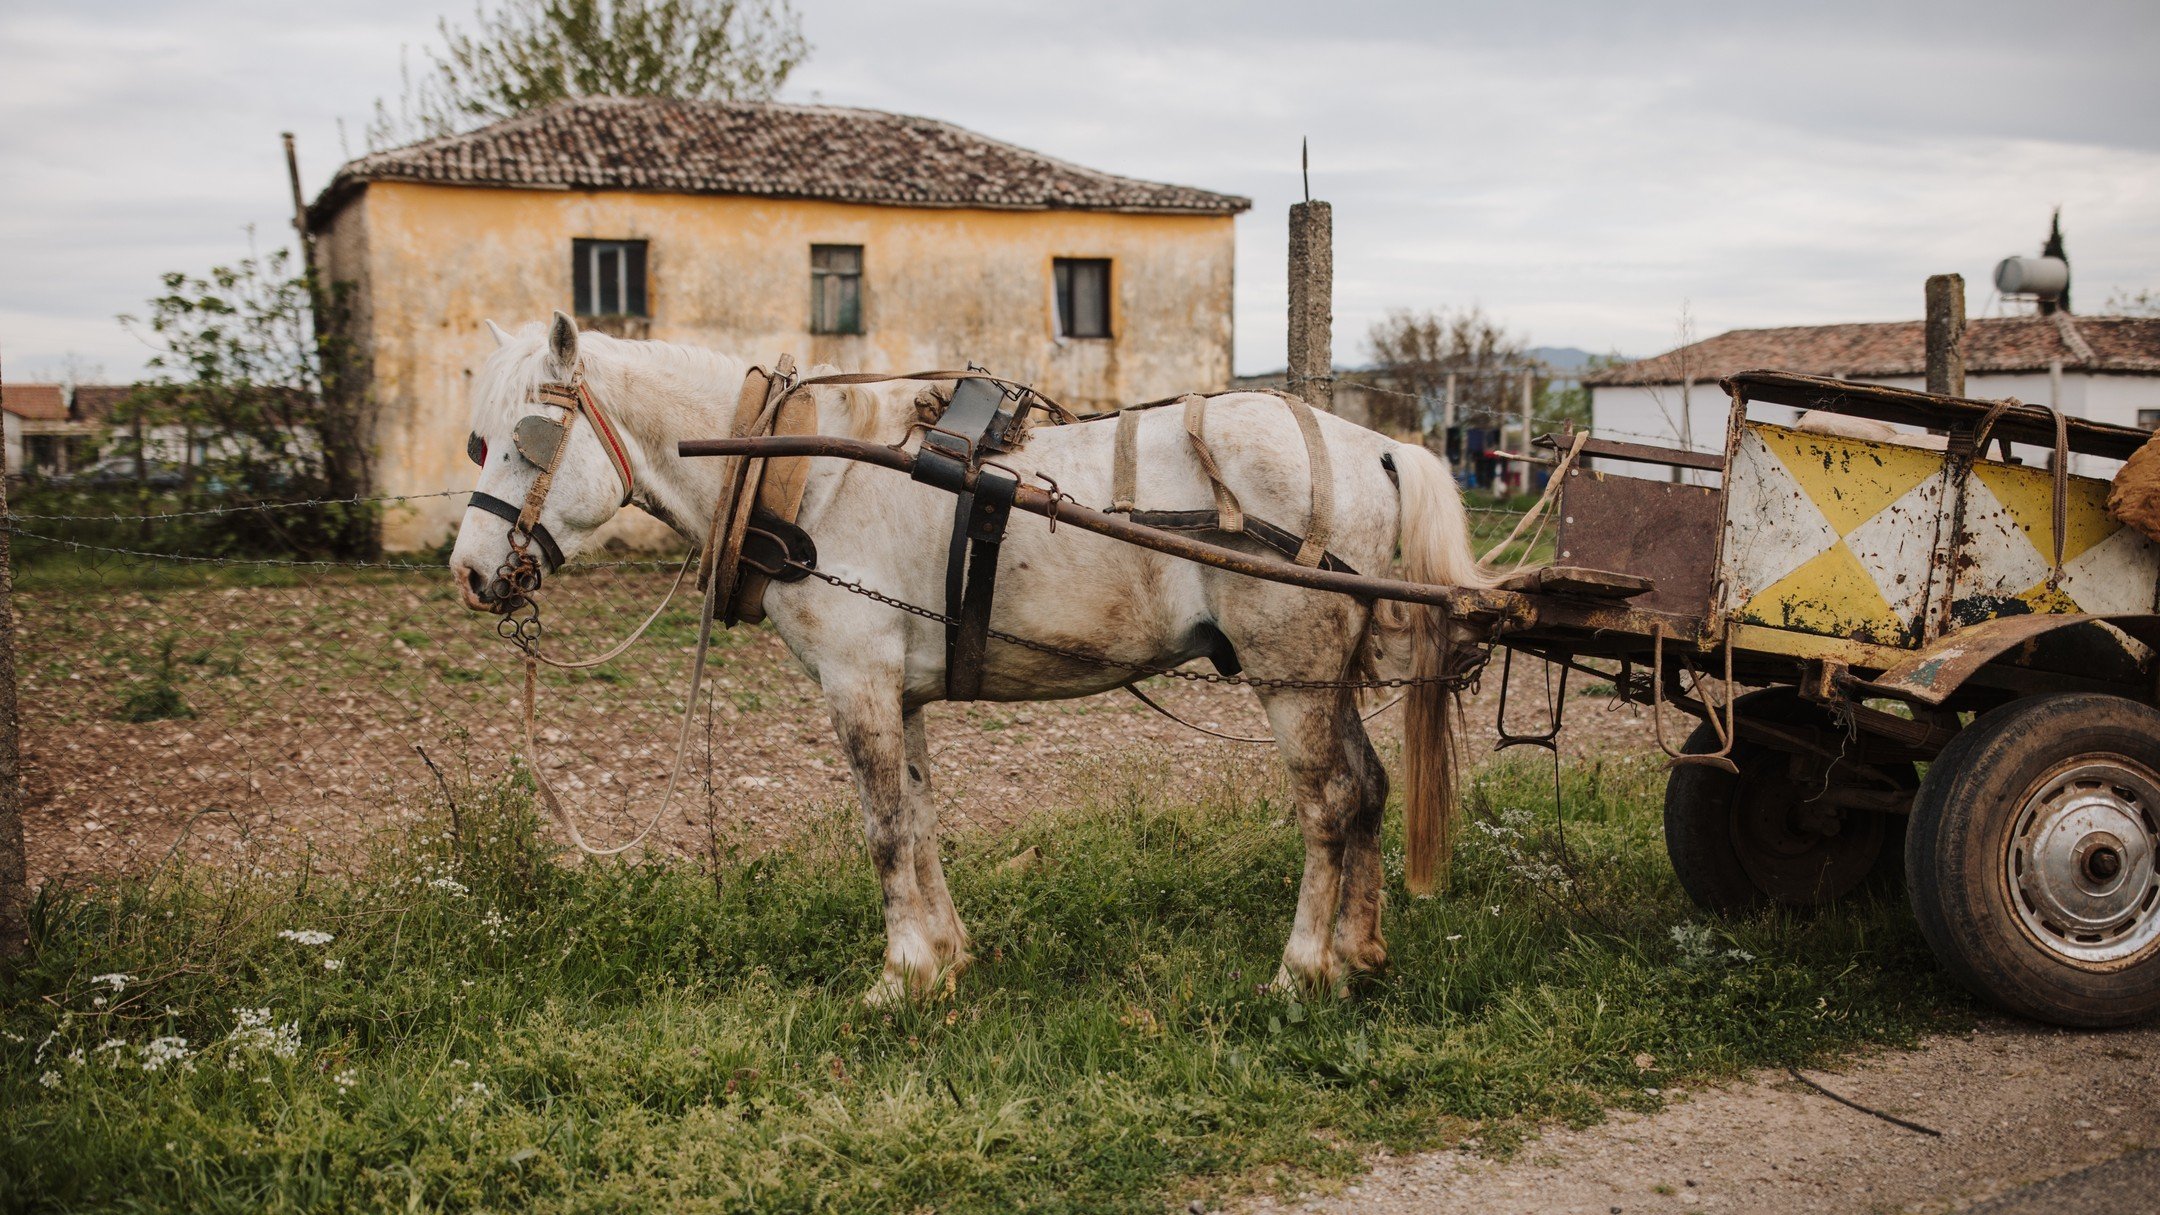 Drove across the border of Montenegro into Albania for an hour, because it was so close we couldn't not. They didn't stamp our passports, but we did get to see this Albanian pony and some cute piglets (sadly not pictured because driving manual and op